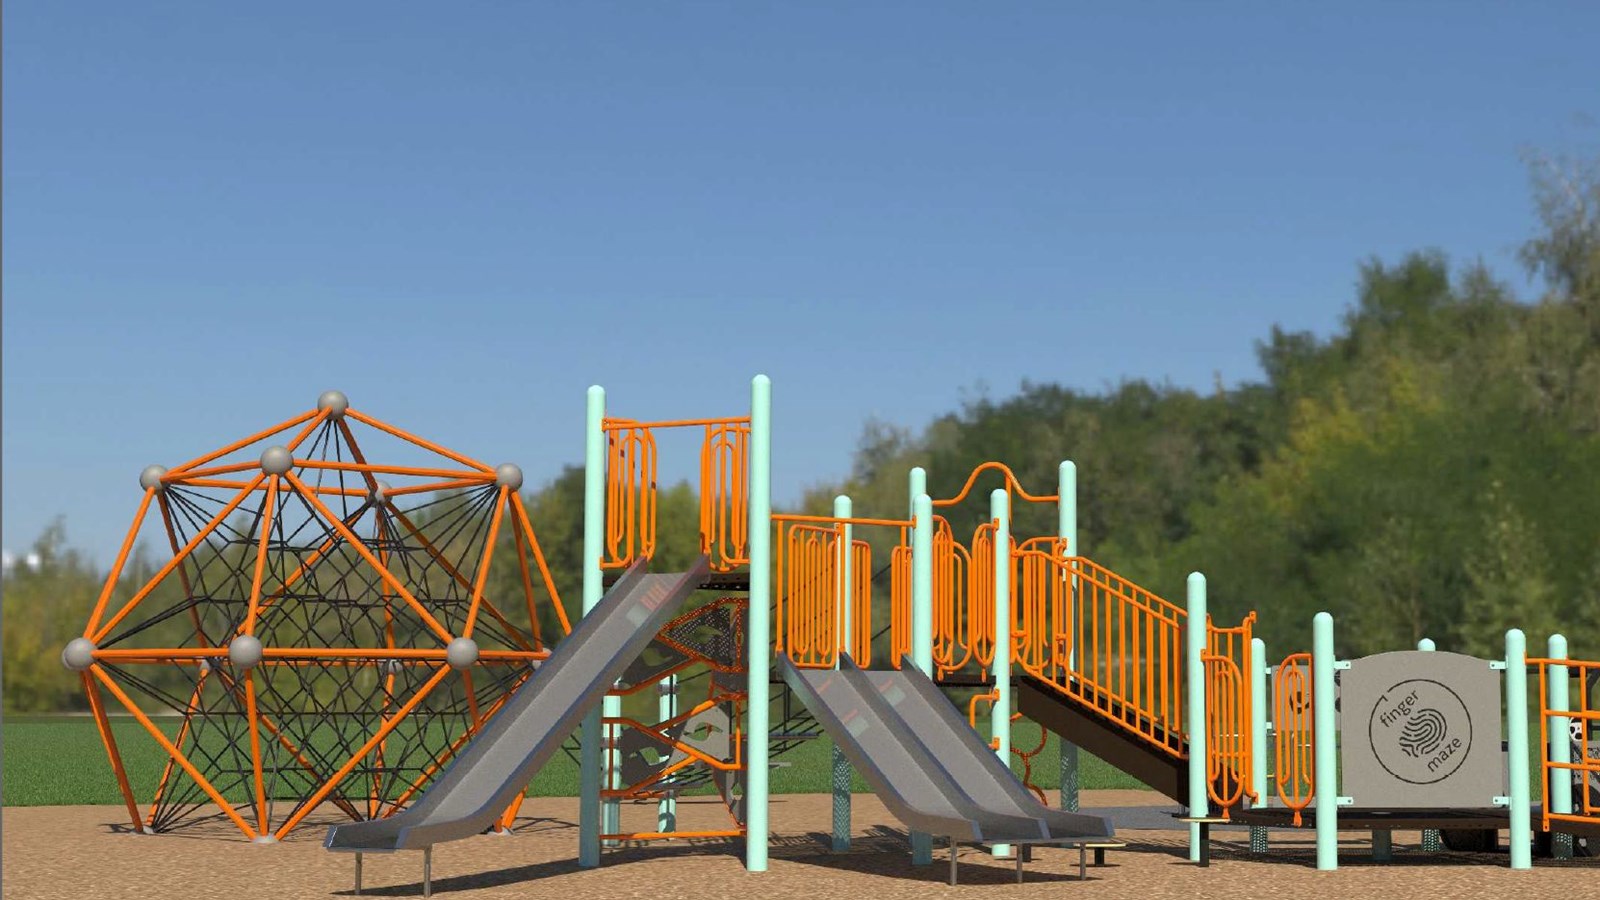 Elementary schools increasingly in need of financial assistance for playground fundraising